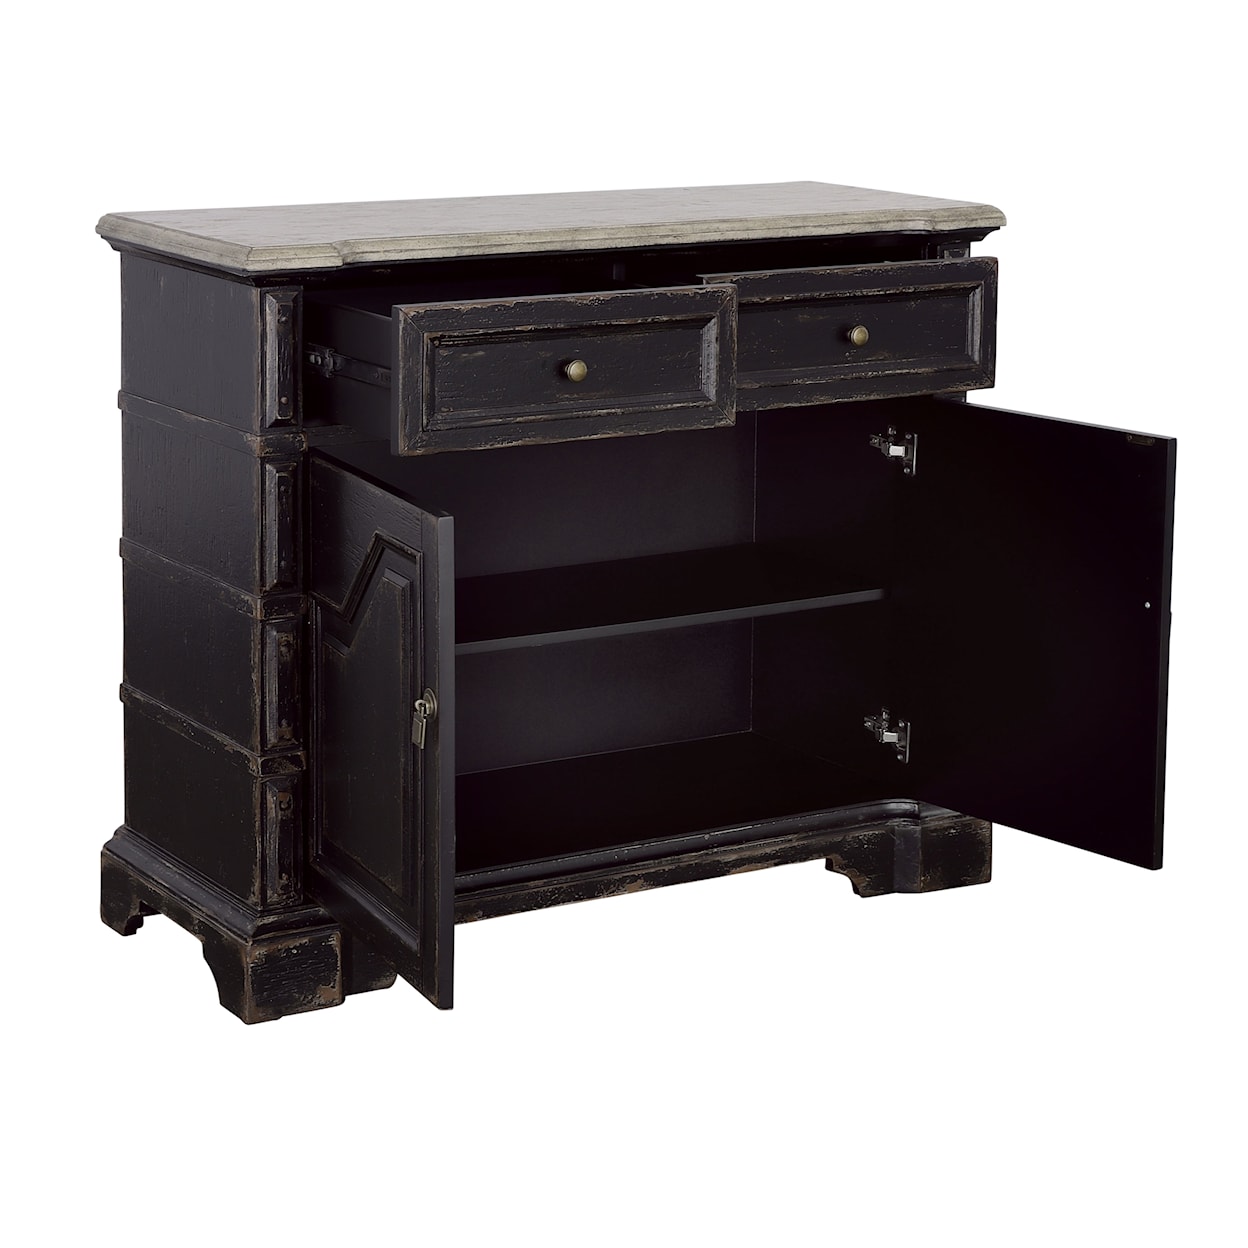 C2C Coast to Coast Imports Two Door Two Drawer Cabinet